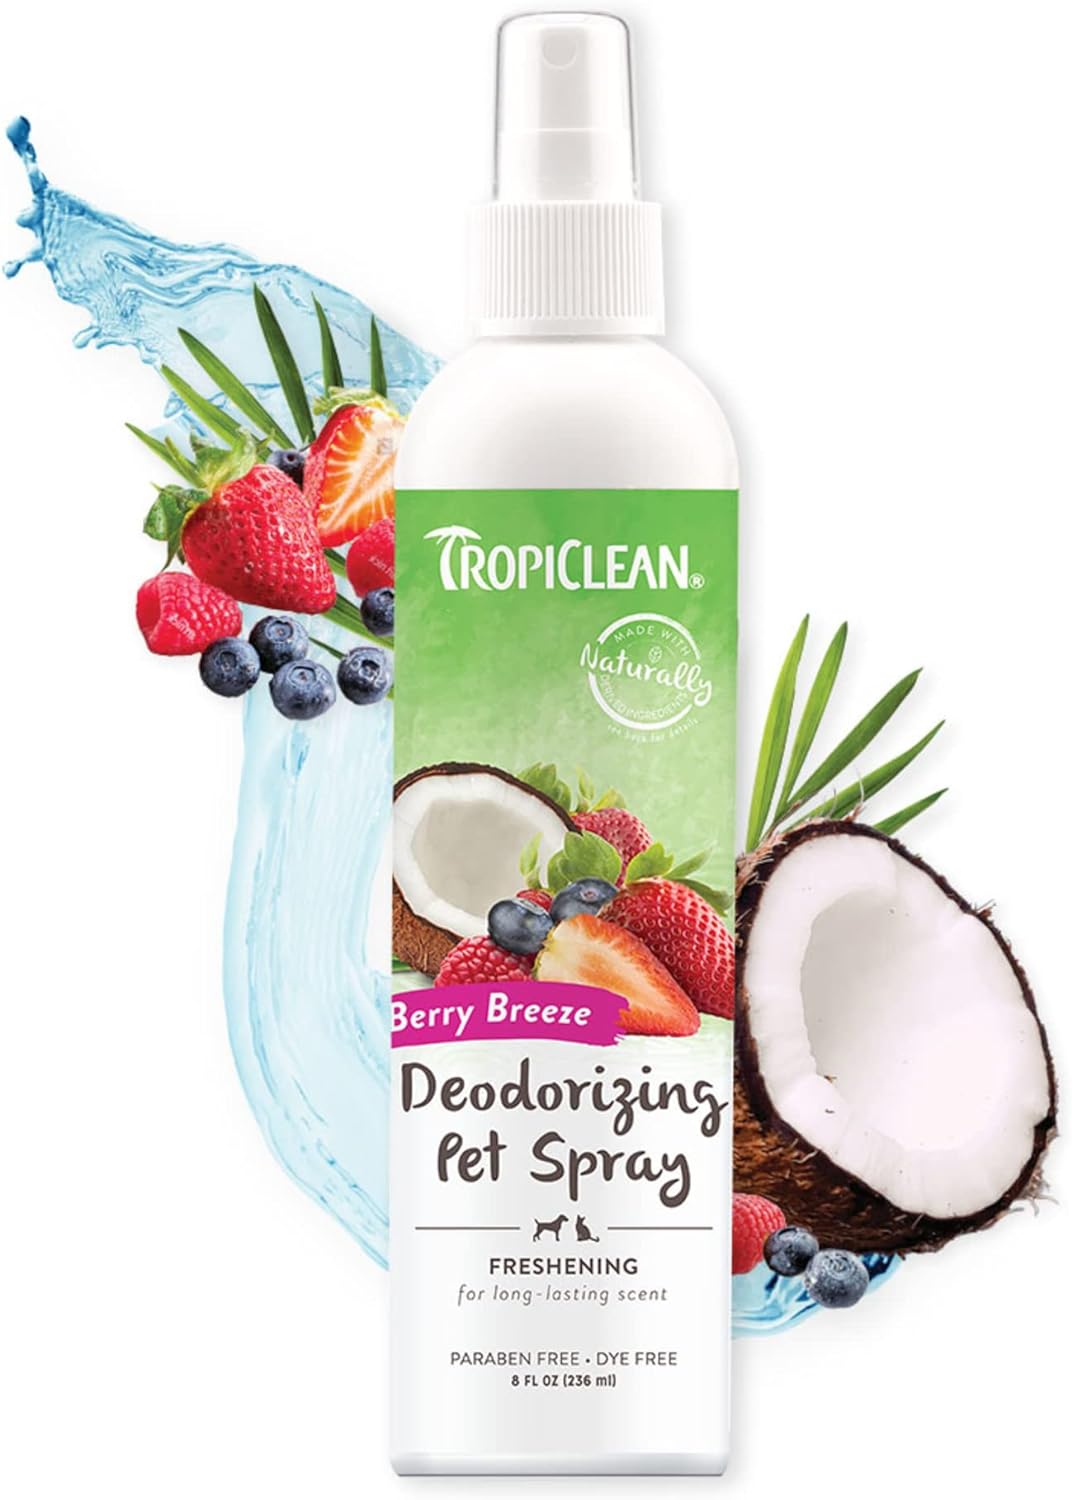 TropiClean Dog Perfume Spray Grooming Supplies - Dog Deodorant Spray for Smelly Dogs - Dog Cologne Breaks Down Odours and Deodorises Dogs and Cats - Used by Groomers - Berry Breeze, 236ml?TRBESP8Z